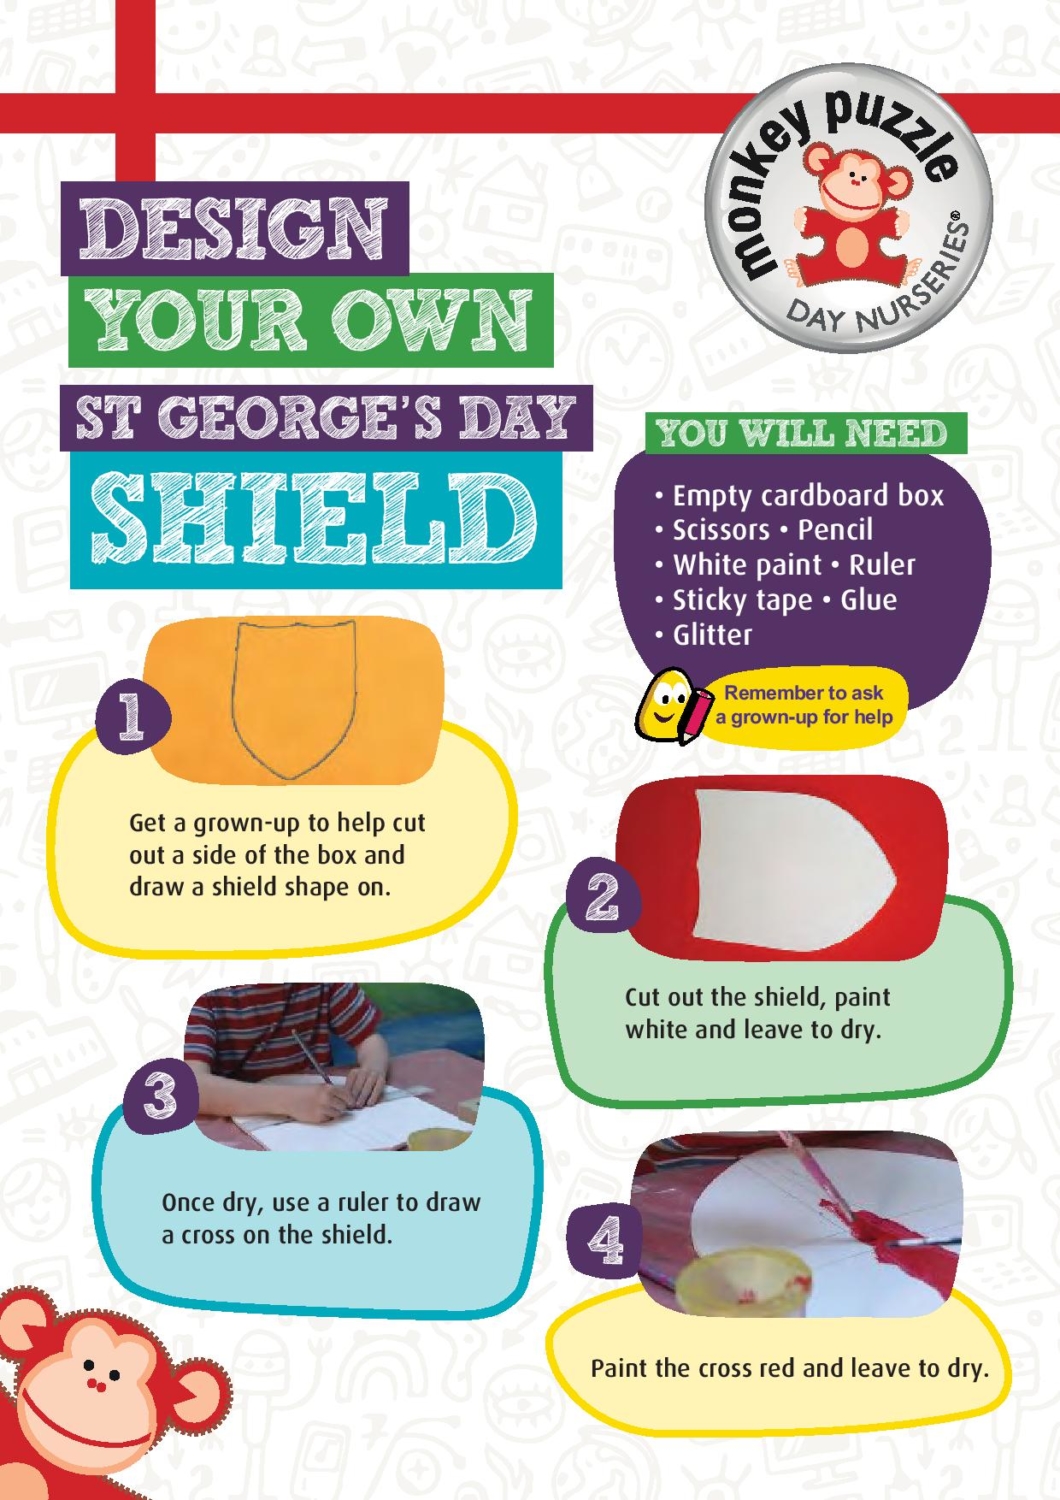 Design your own shield step one